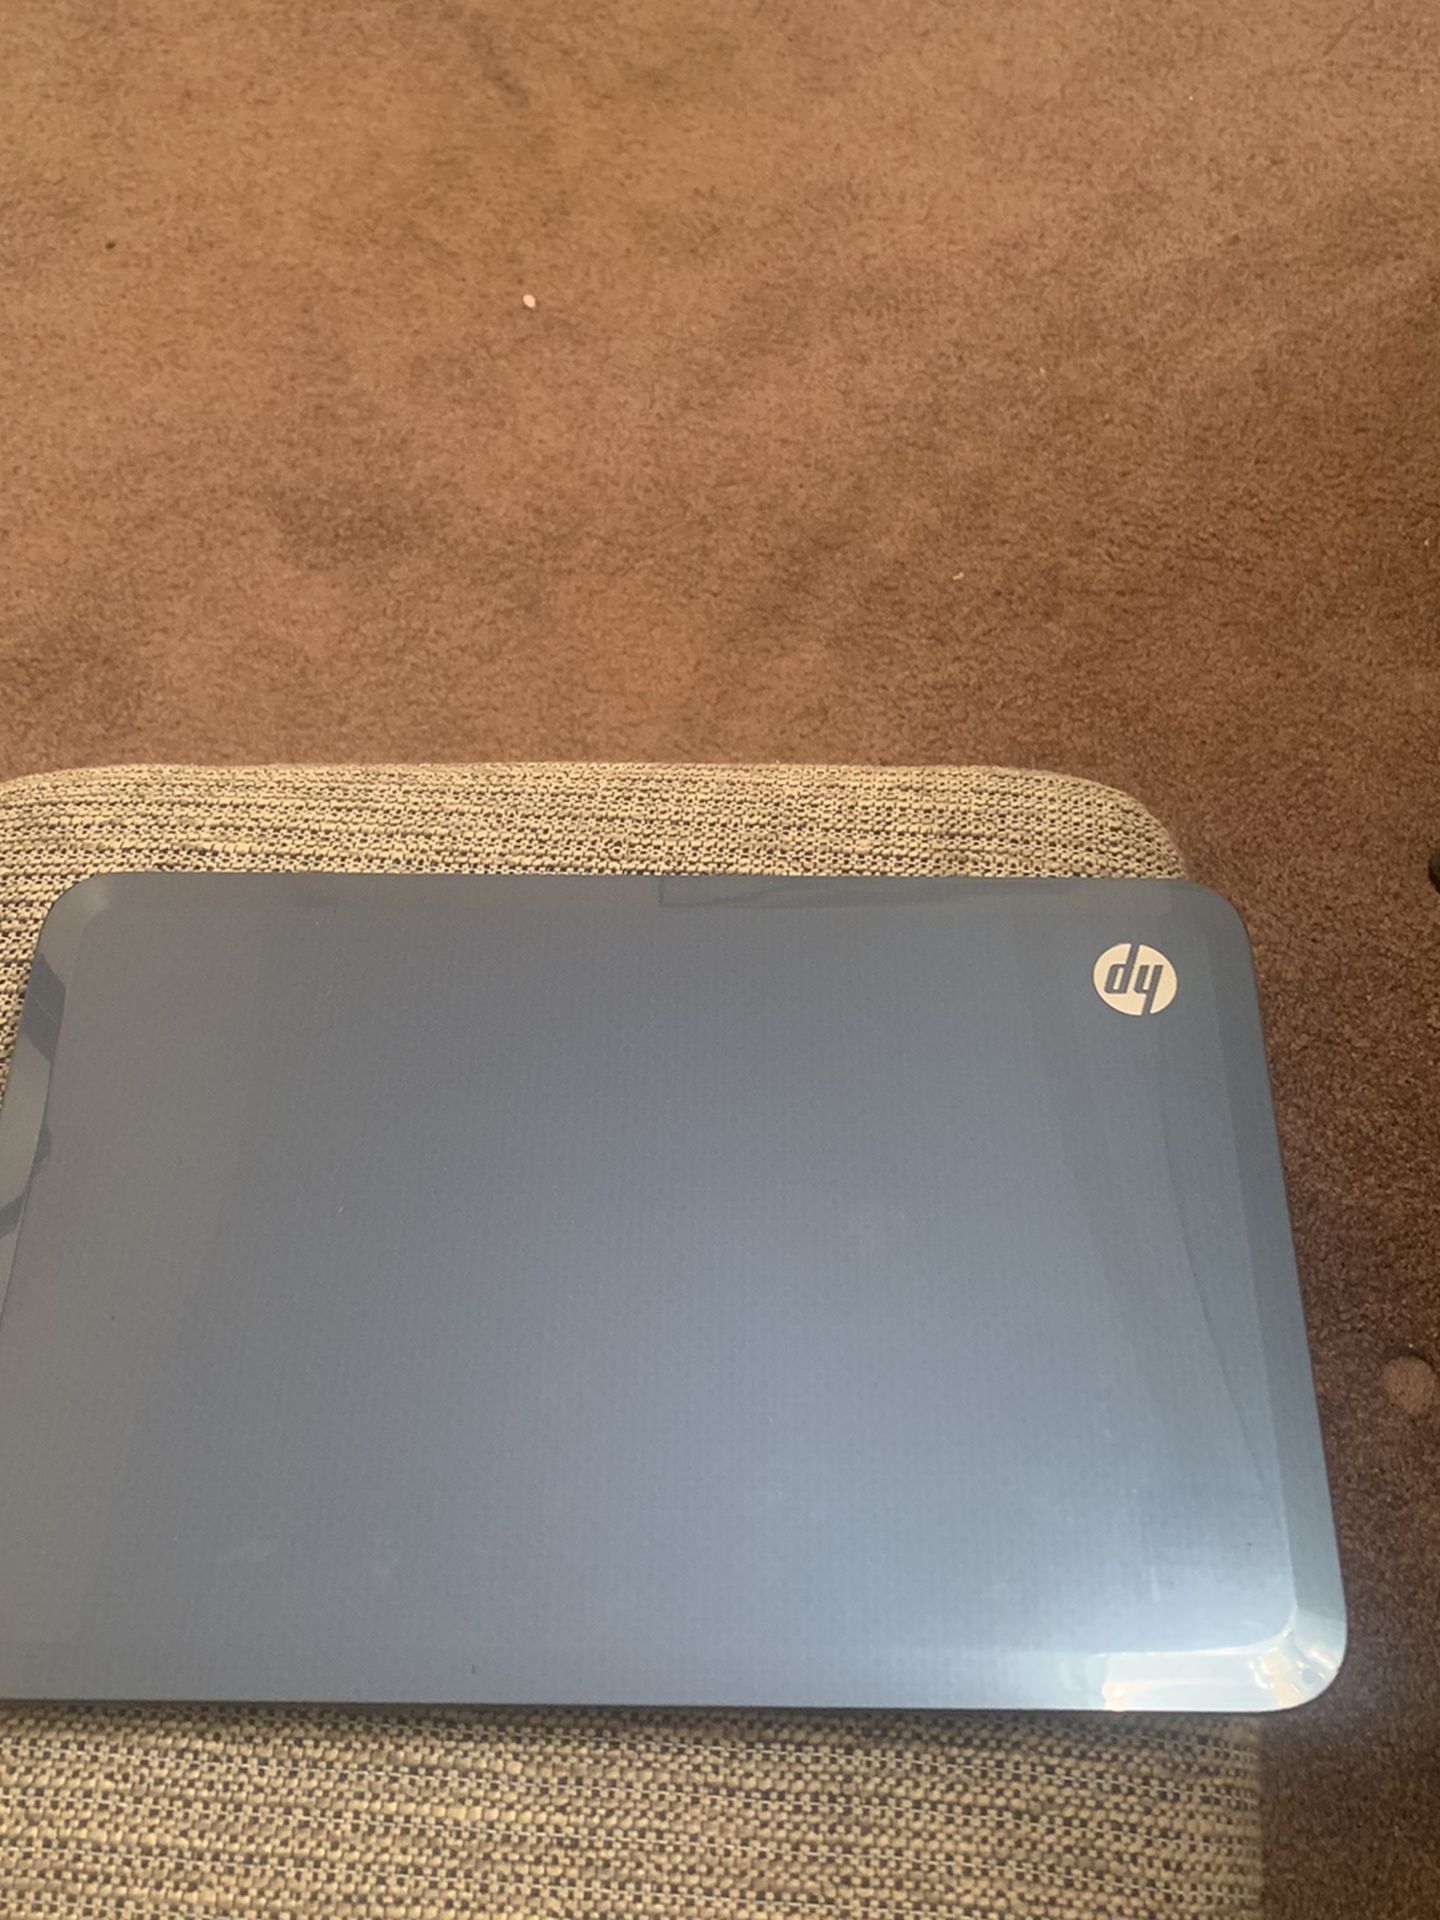 Blue HP Laptop For Sale!!! Got A New One For Christmas & Don’t Need This One Anymore $125 OBO!!!